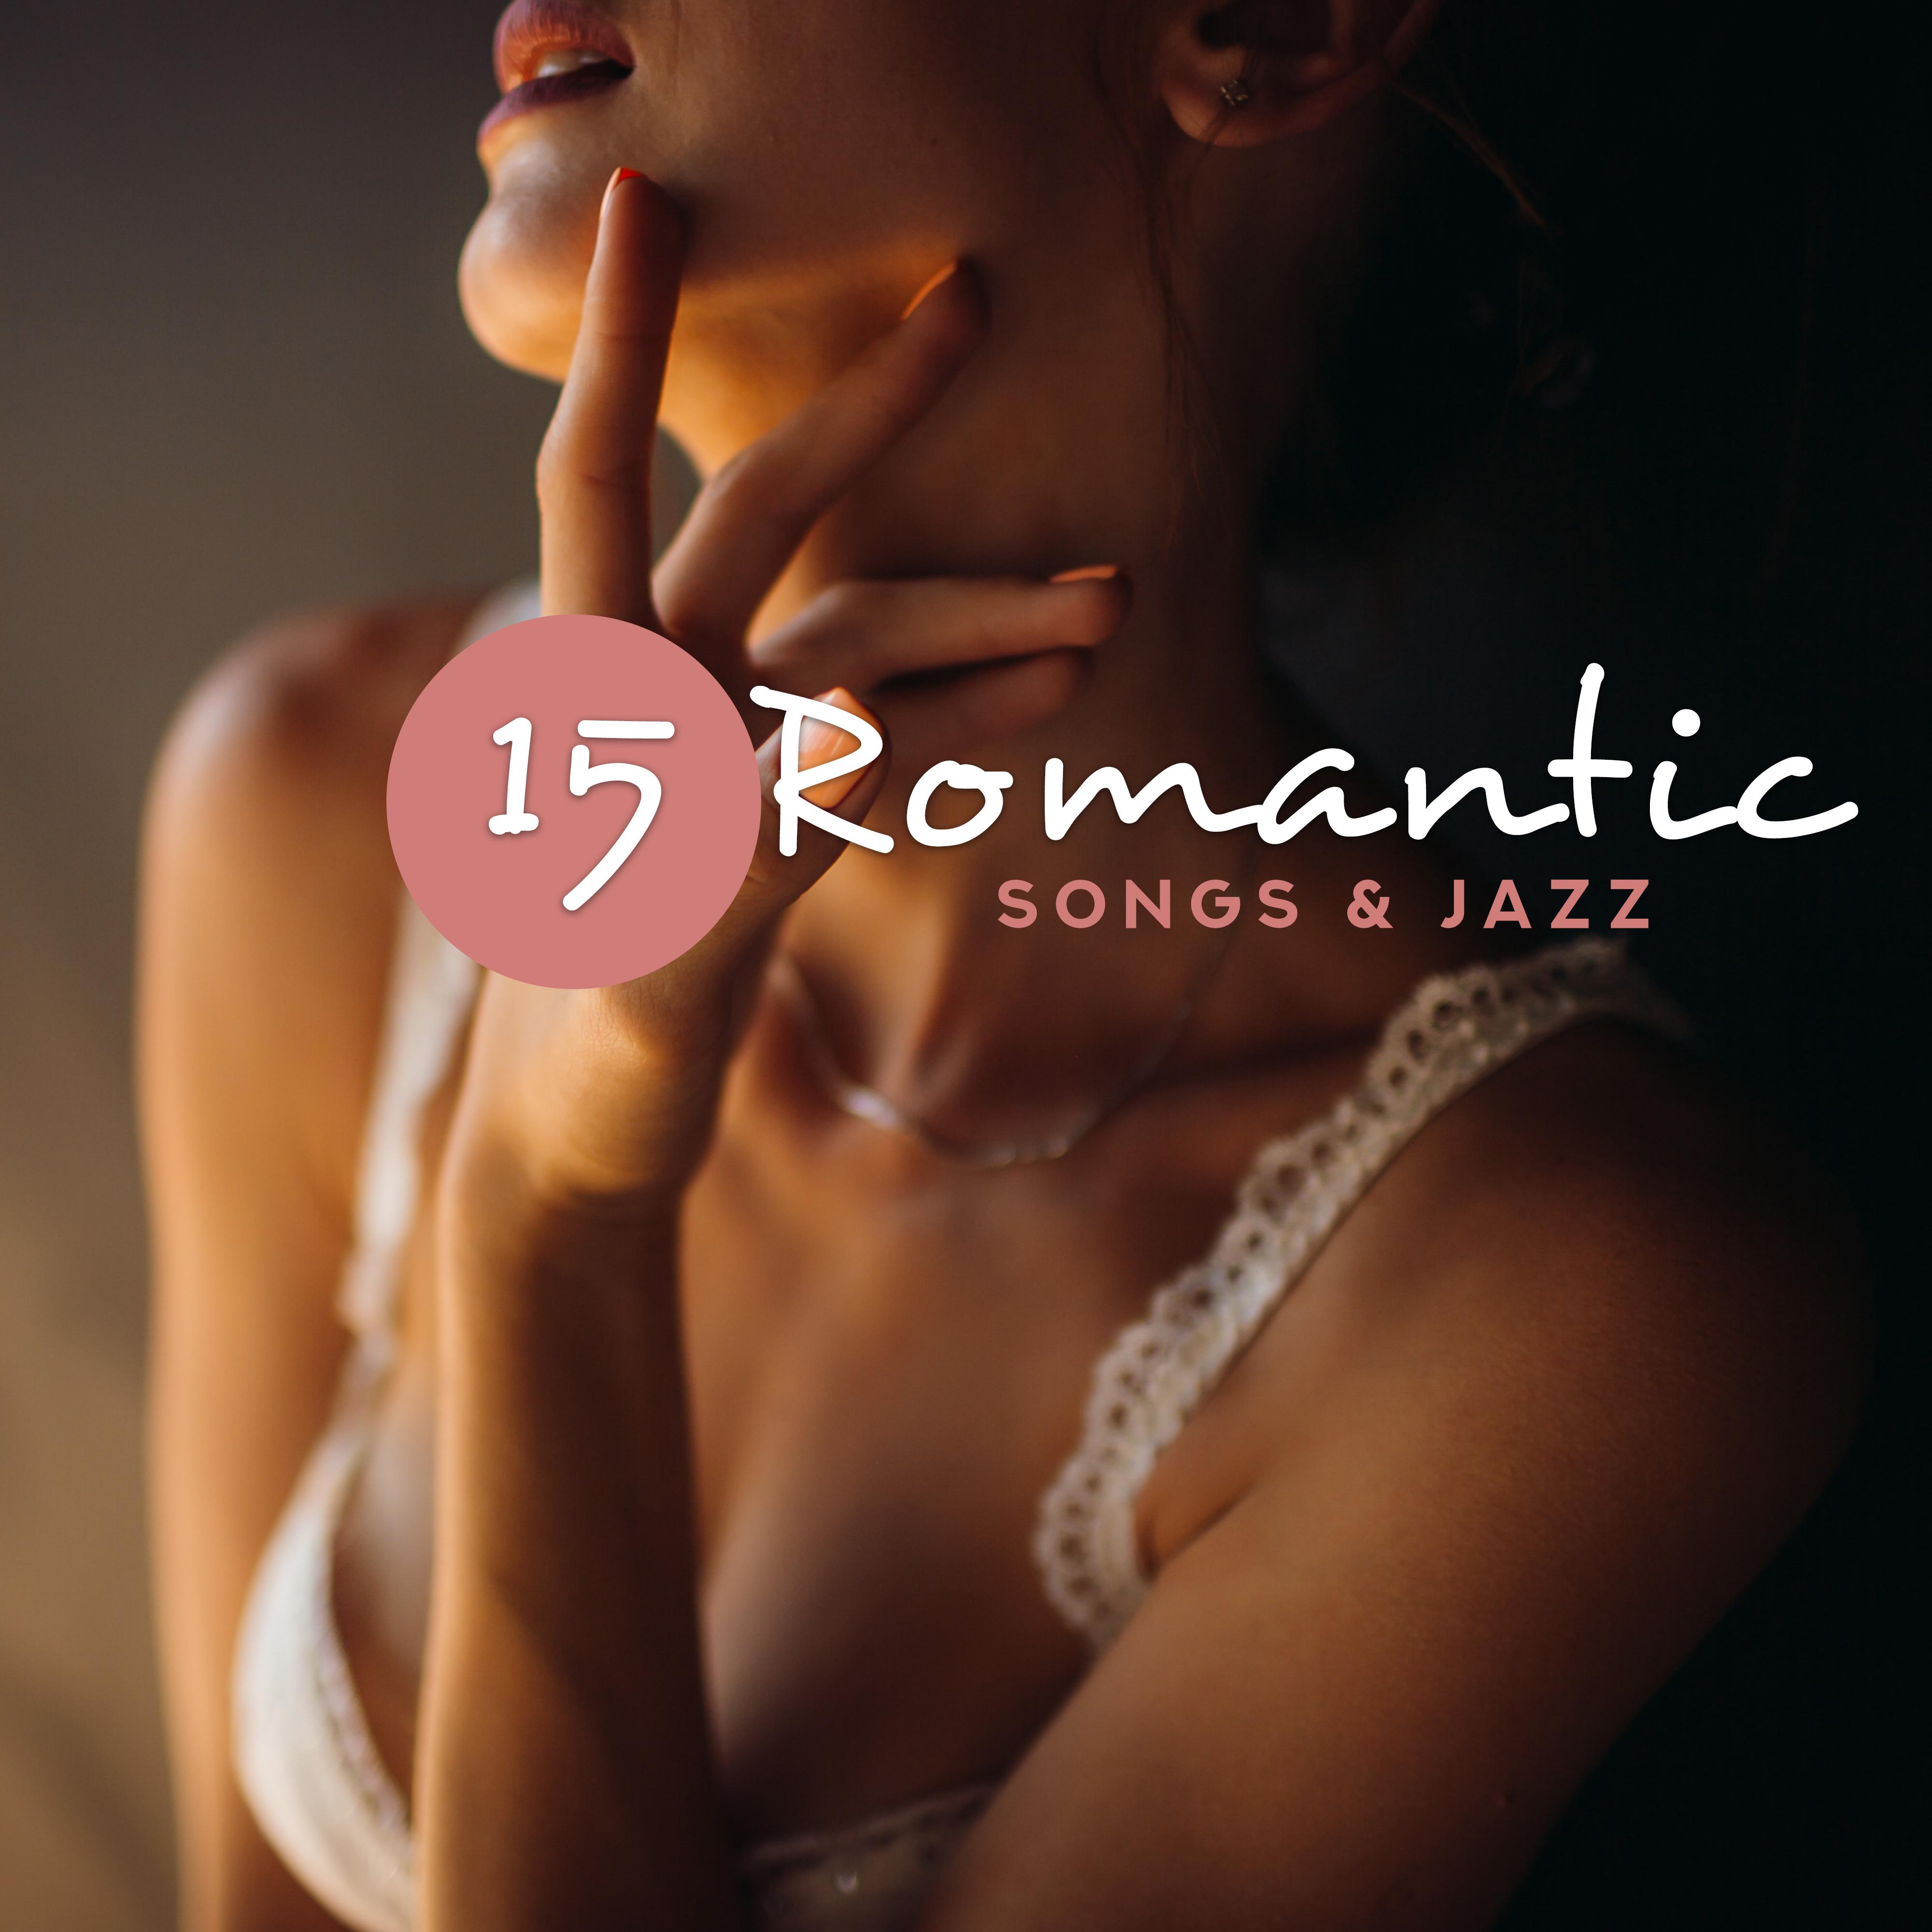 15 Romantic Songs & Jazz: Smooth Music at Night, Sensual Relaxation for Lovers, Ambient Jazz